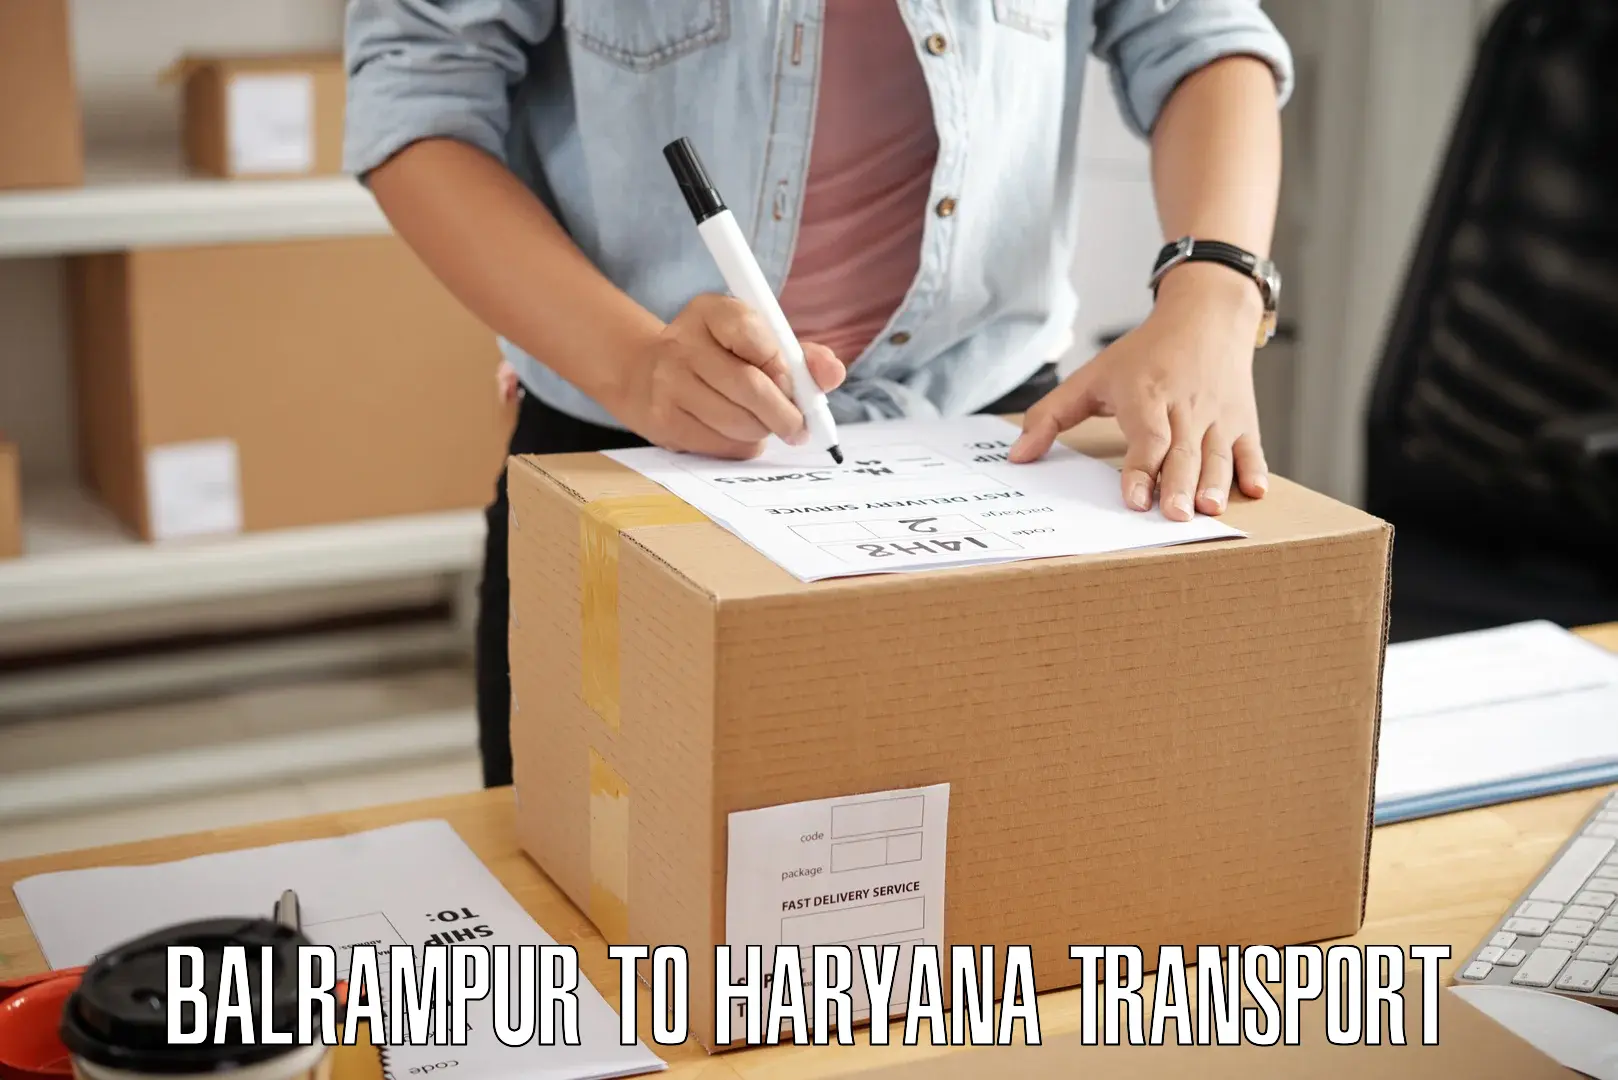 Best transport services in India Balrampur to Bhiwani